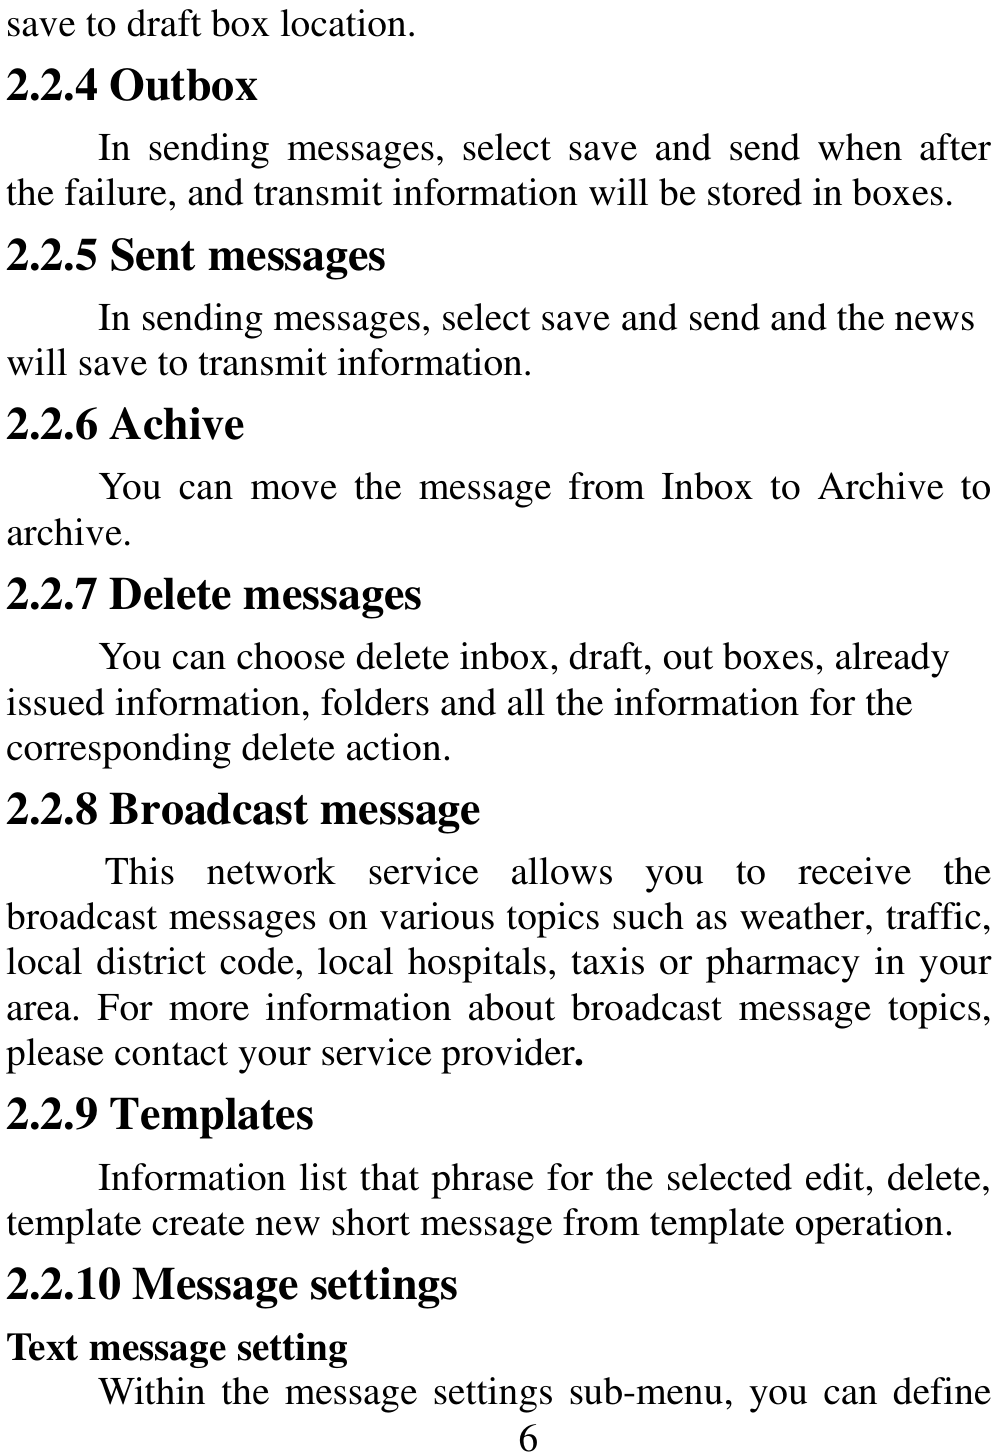                                                      6save to draft box location. 2.2.4 Outbox In  sending  messages,  select  save  and  send  when  after the failure, and transmit information will be stored in boxes. 2.2.5 Sent messages In sending messages, select save and send and the news will save to transmit information. 2.2.6 Achive You  can  move  the  message  from  Inbox  to  Archive  to archive. 2.2.7 Delete messages You can choose delete inbox, draft, out boxes, already issued information, folders and all the information for the corresponding delete action. 2.2.8 Broadcast message This  network  service  allows  you  to  receive  the broadcast messages on various topics such as weather, traffic, local district code, local hospitals, taxis or pharmacy in your area.  For  more information  about  broadcast  message  topics, please contact your service provider. 2.2.9 Templates Information list that phrase for the selected edit, delete, template create new short message from template operation. 2.2.10 Message settings Text message setting Within the message settings sub-menu, you can define 